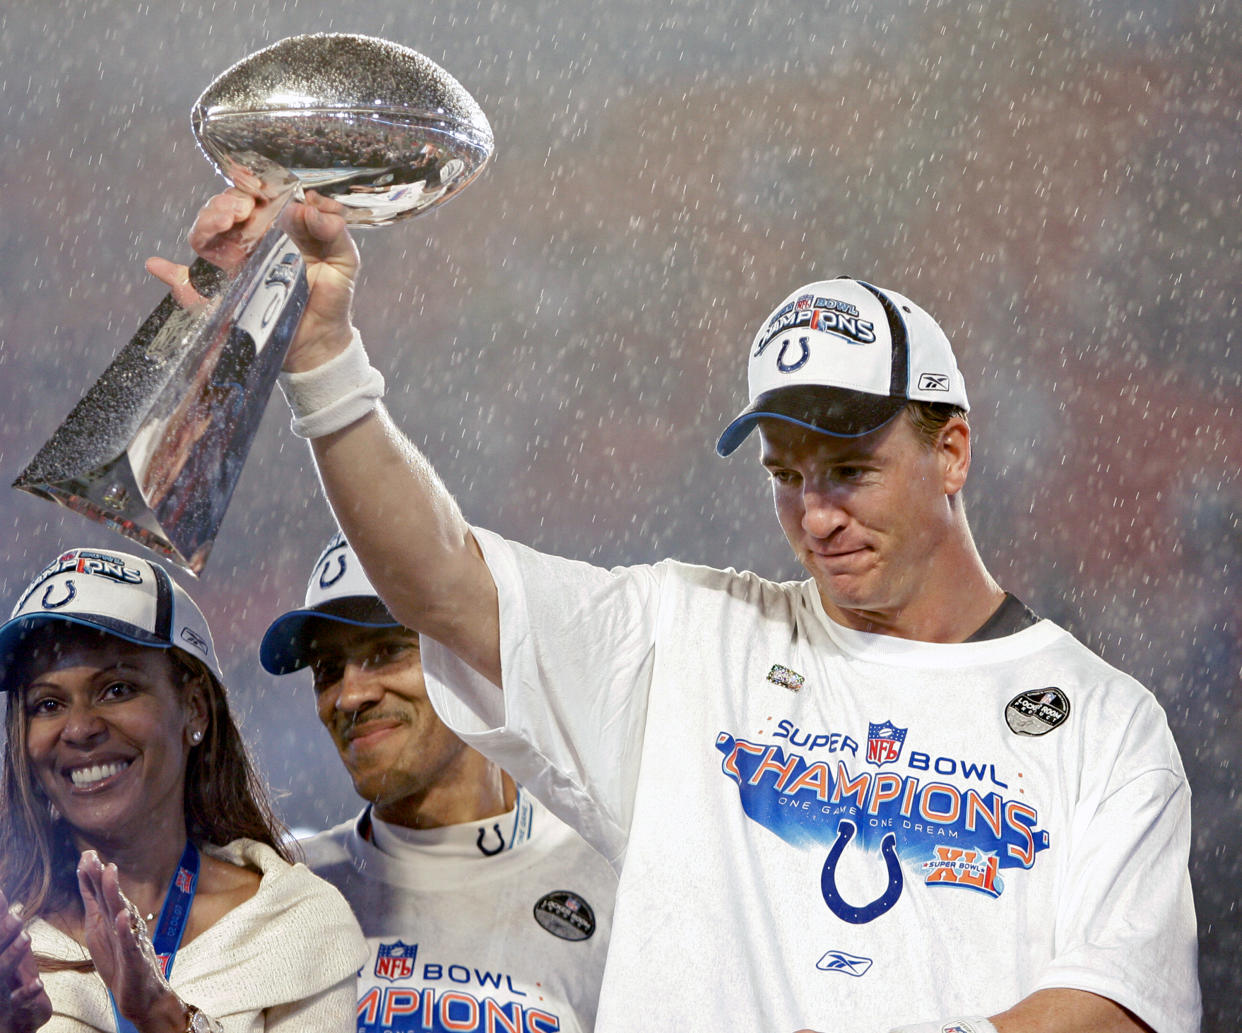 Peyton Manning finally could raise the Lombardi Trophy after the Indianpolis Colts beat the Chicago Bears in Super Bowl XLI. (Photo by Al Diaz/Miami Herald/Tribune News Service via Getty Images)